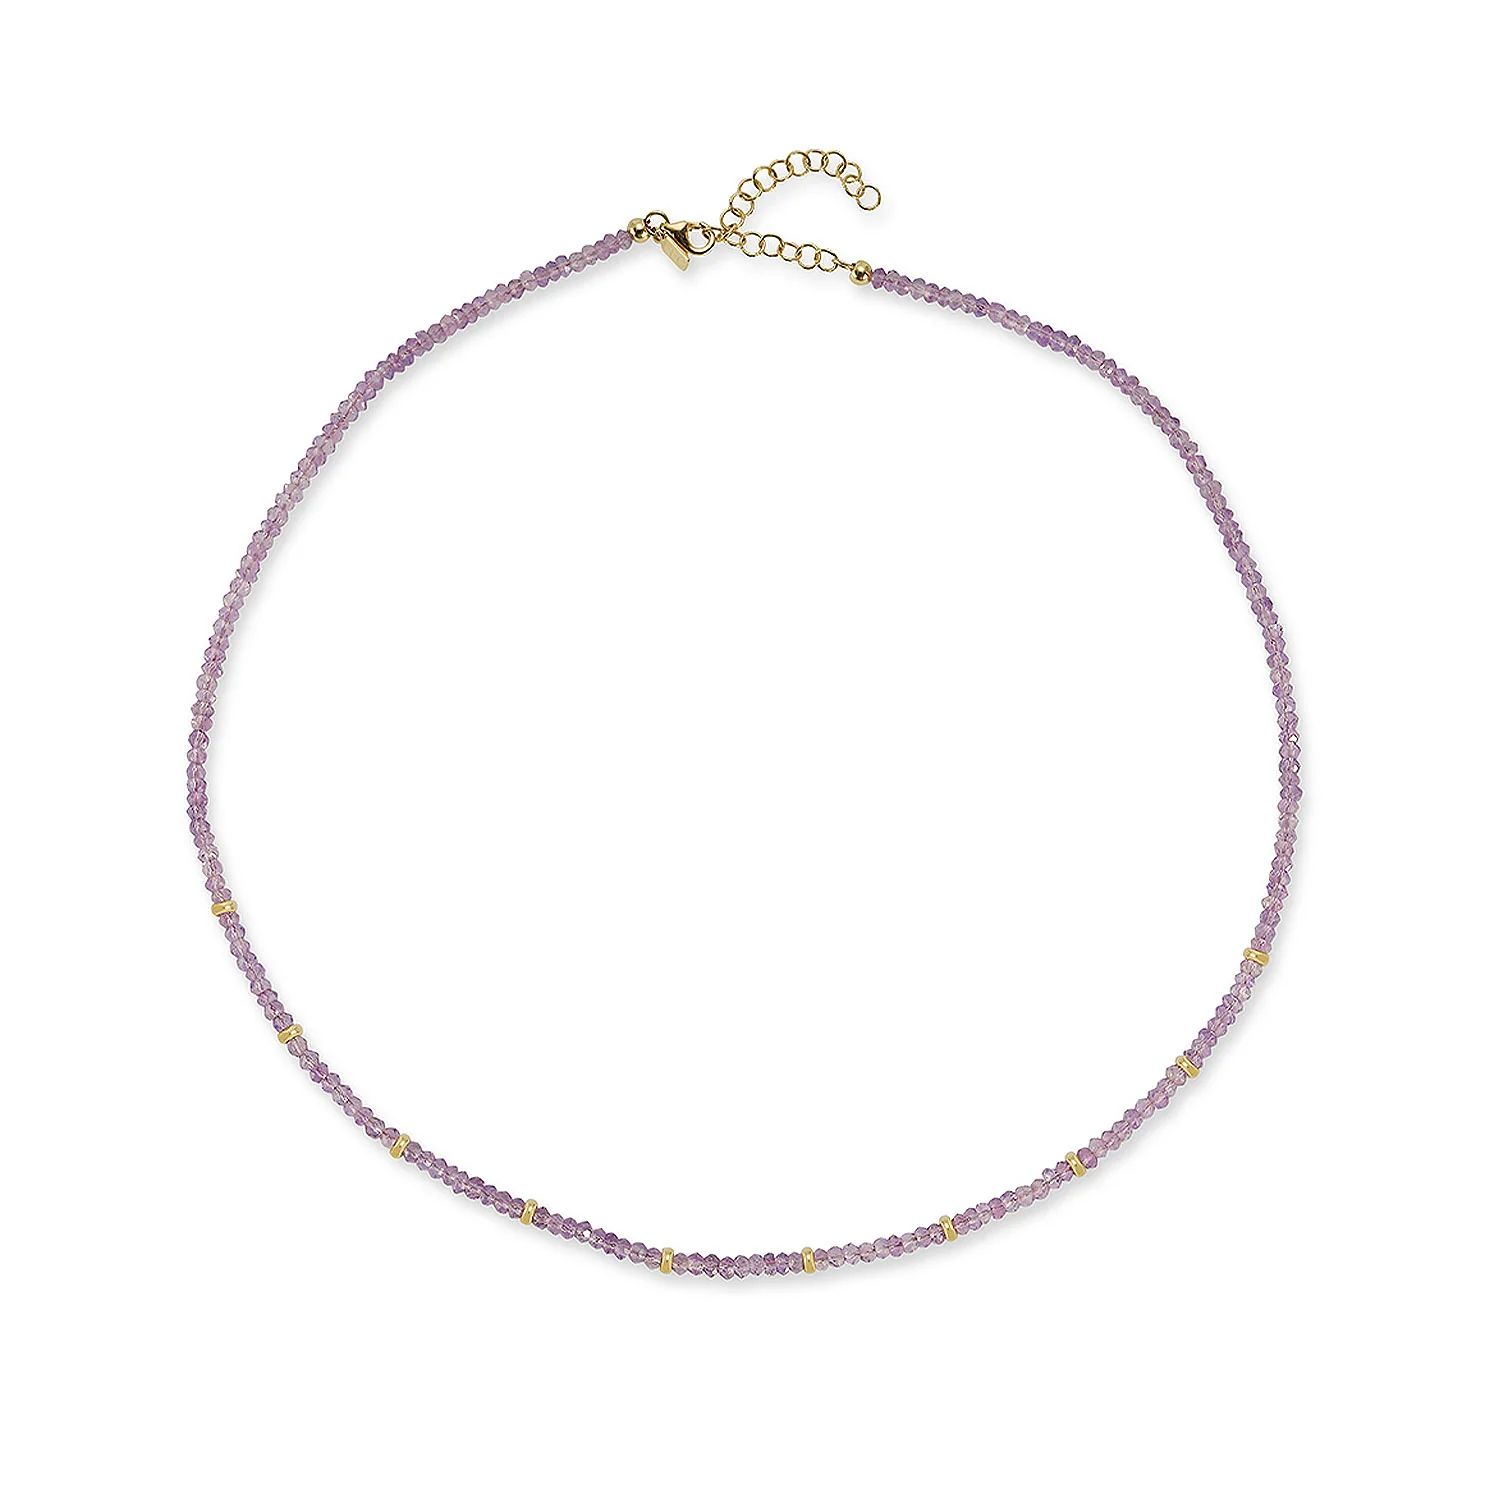 Birthstone Bead Necklace In Amethyst | EF Collection